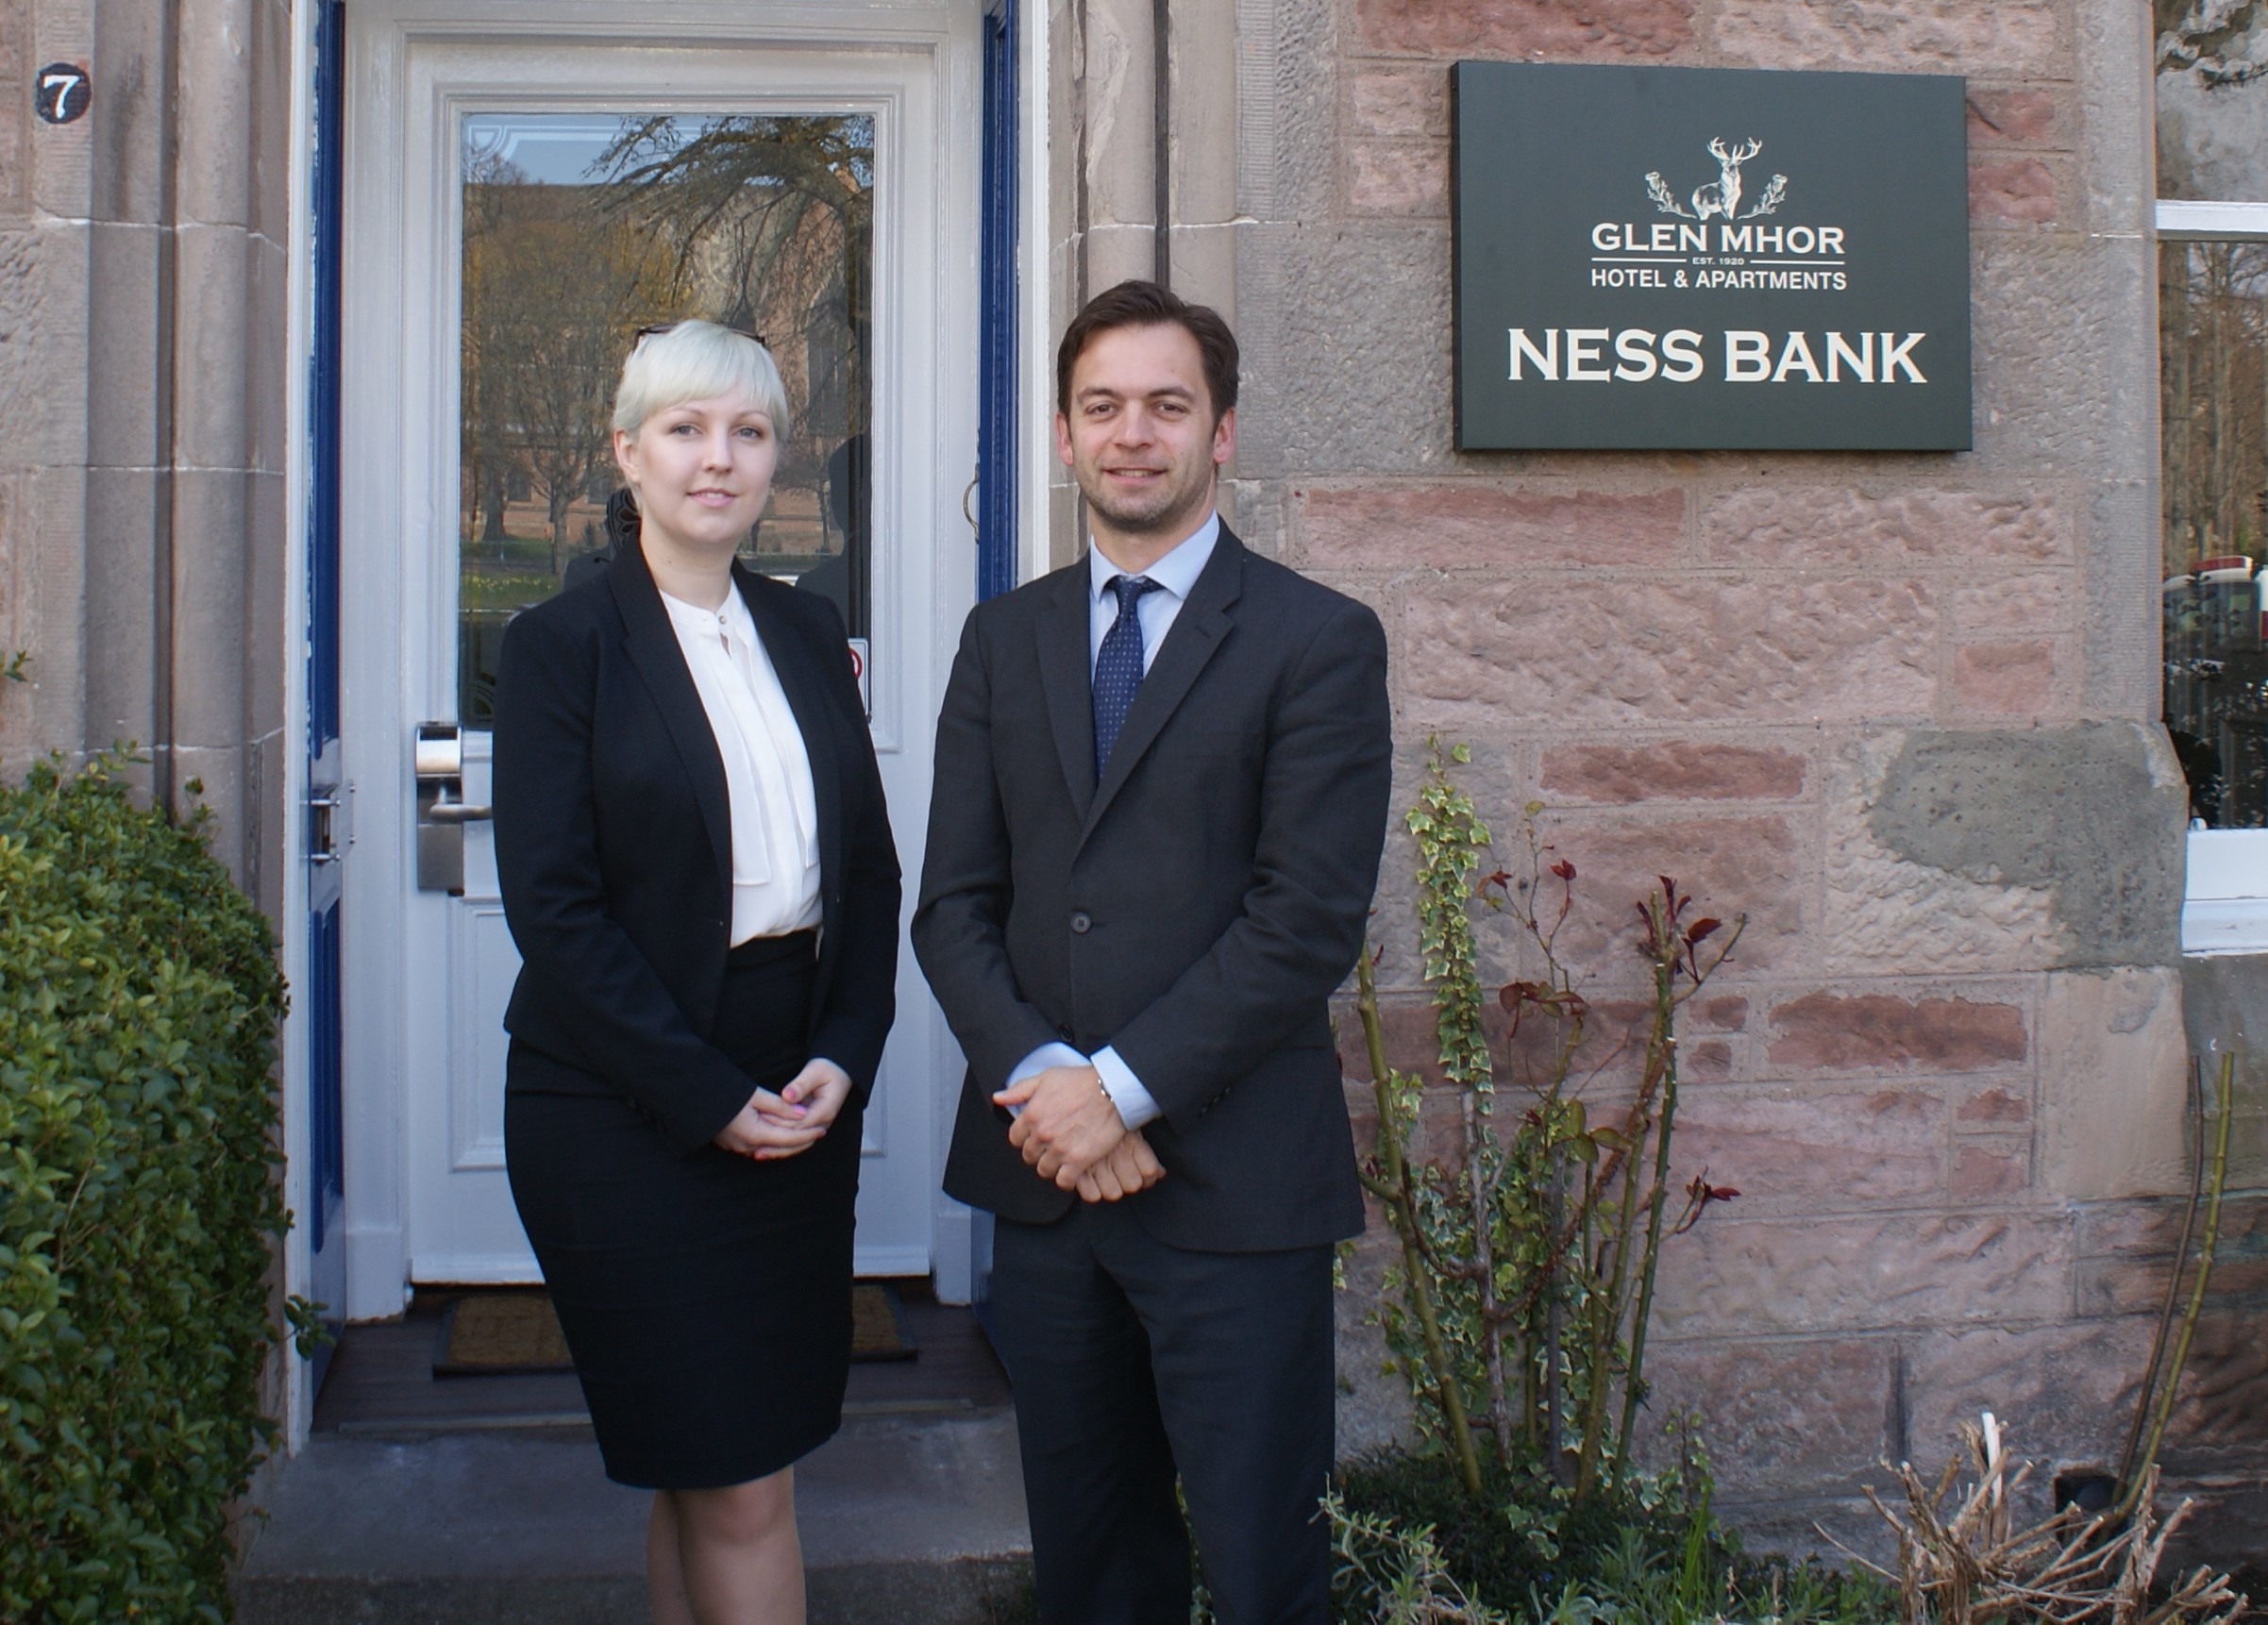 Glen Mhor General Manager Emmanuel Moine (right) and new Sales and Marketing Manager Hanna Garrett outside the hotel’s new Ness Bank property.